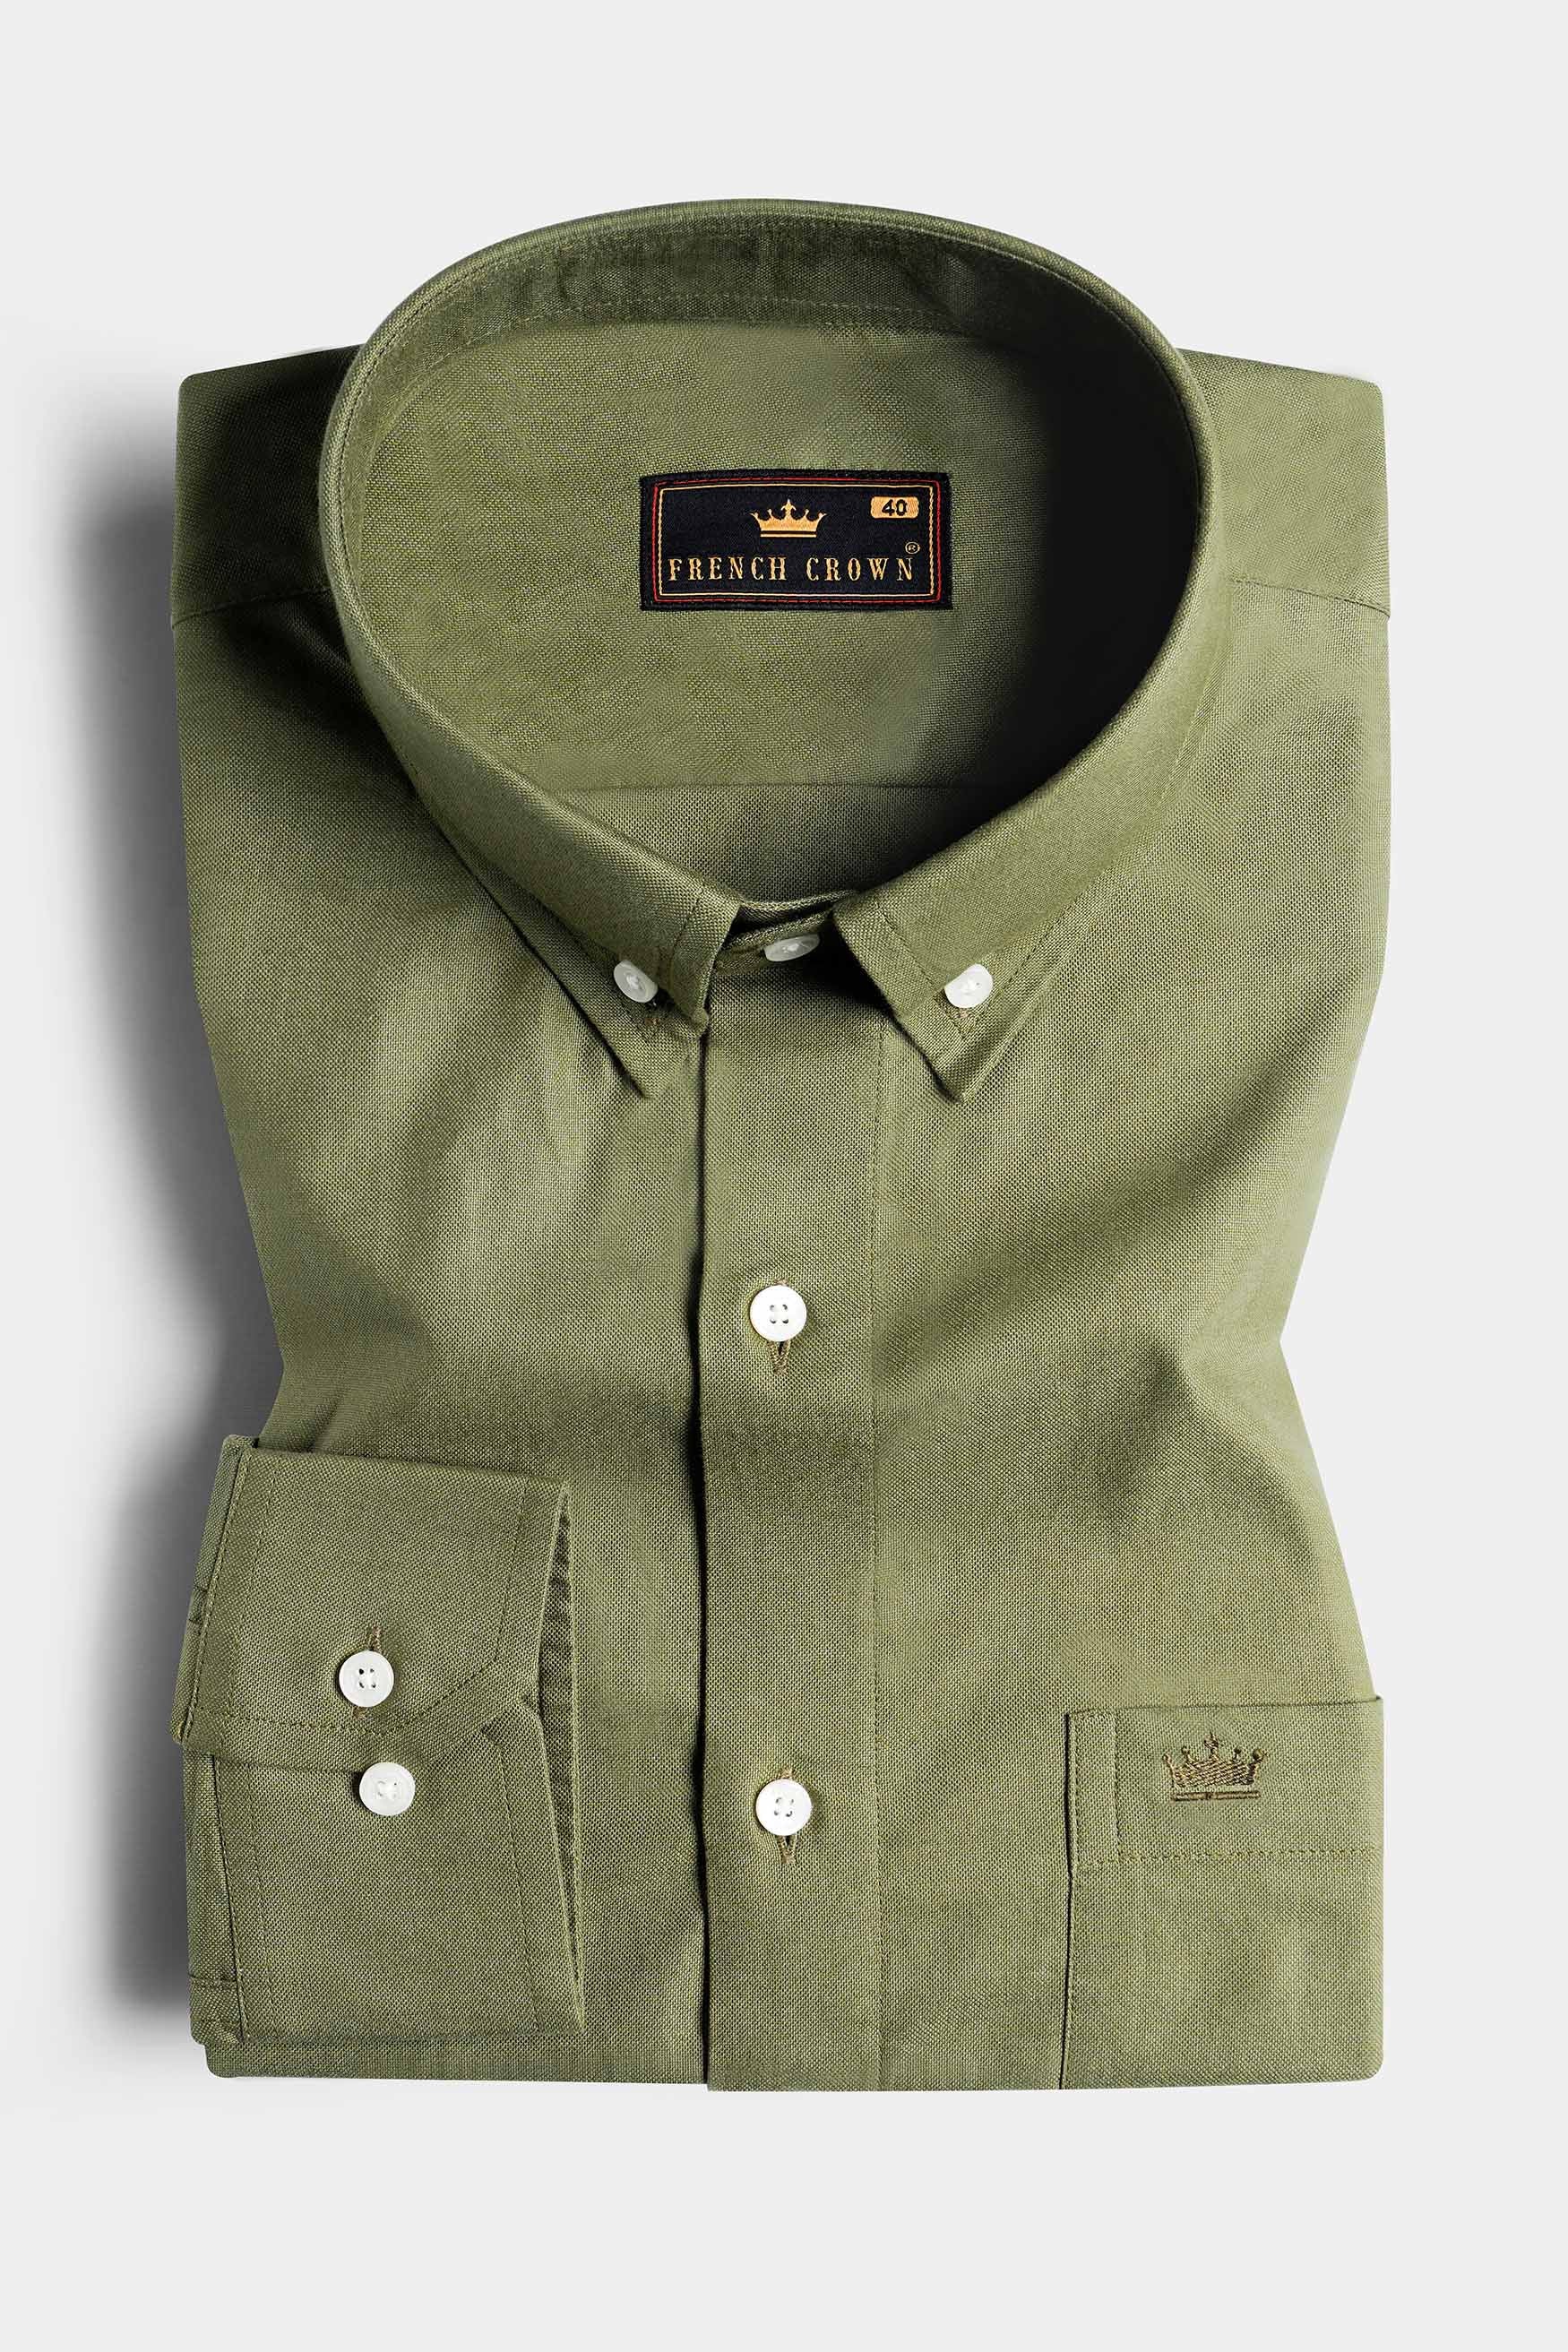 Moss Green Hand Painted Royal Oxford Designer Shirt 6265-BD-ART-38, 6265-BD-ART-H-38, 6265-BD-ART-39, 6265-BD-ART-H-39, 6265-BD-ART-40, 6265-BD-ART-H-40, 6265-BD-ART-42, 6265-BD-ART-H-42, 6265-BD-ART-44, 6265-BD-ART-H-44, 6265-BD-ART-46, 6265-BD-ART-H-46, 6265-BD-ART-48, 6265-BD-ART-H-48, 6265-BD-ART-50, 6265-BD-ART-H-50, 6265-BD-ART-52, 6265-BD-ART-H-52